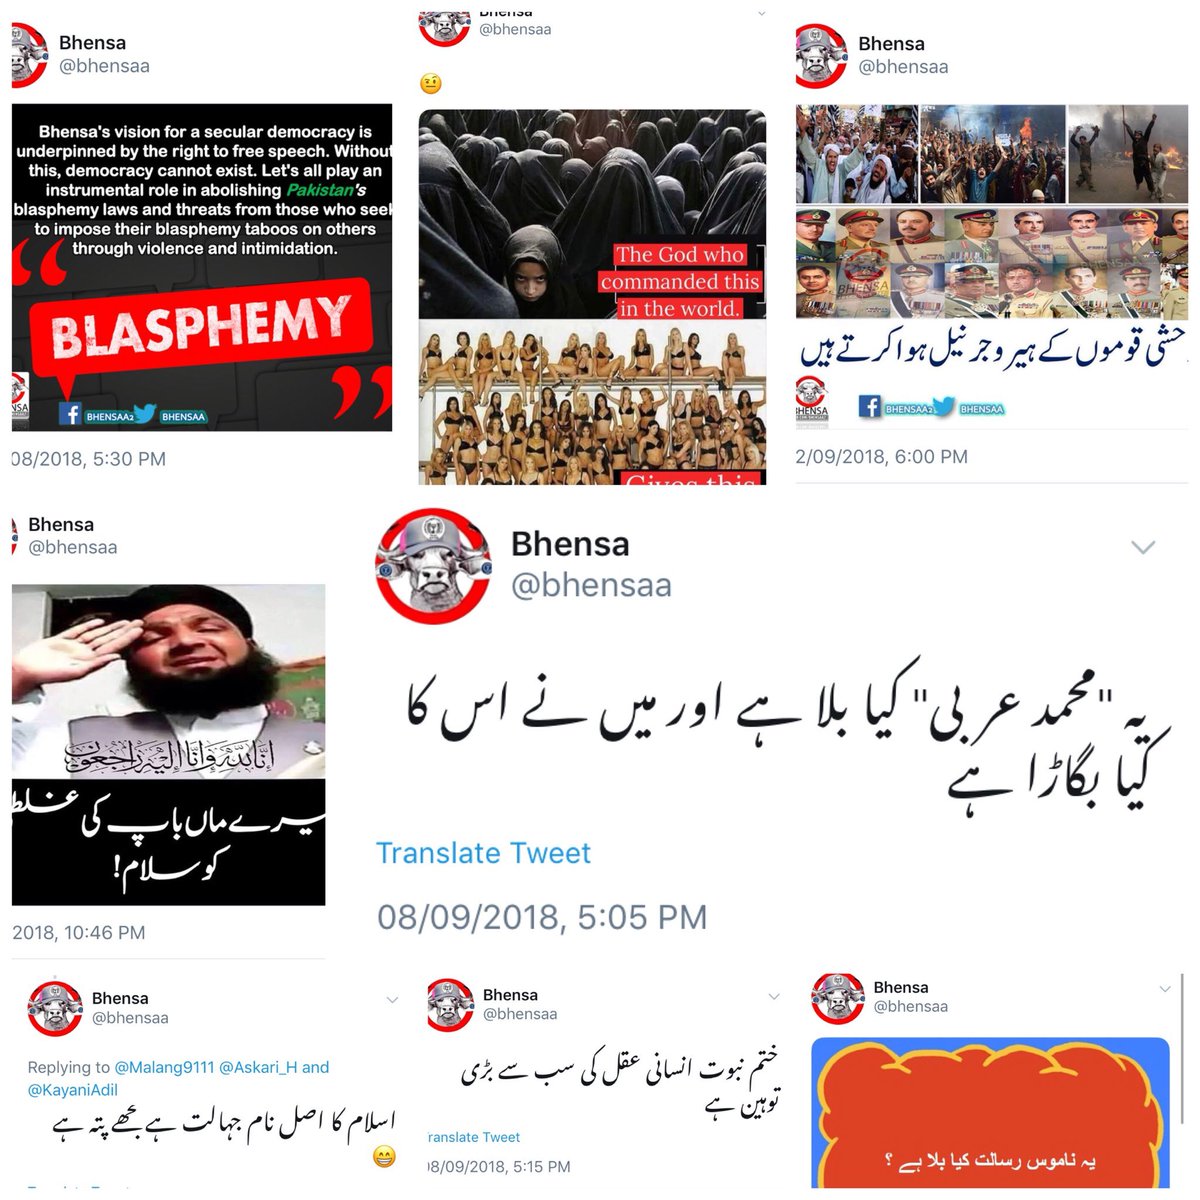 Waqas Ahmad Goraya has also been linked with blasphemous account Bhensa & similar posts by him online, over the years. #IndiaWagingHybridWar/104